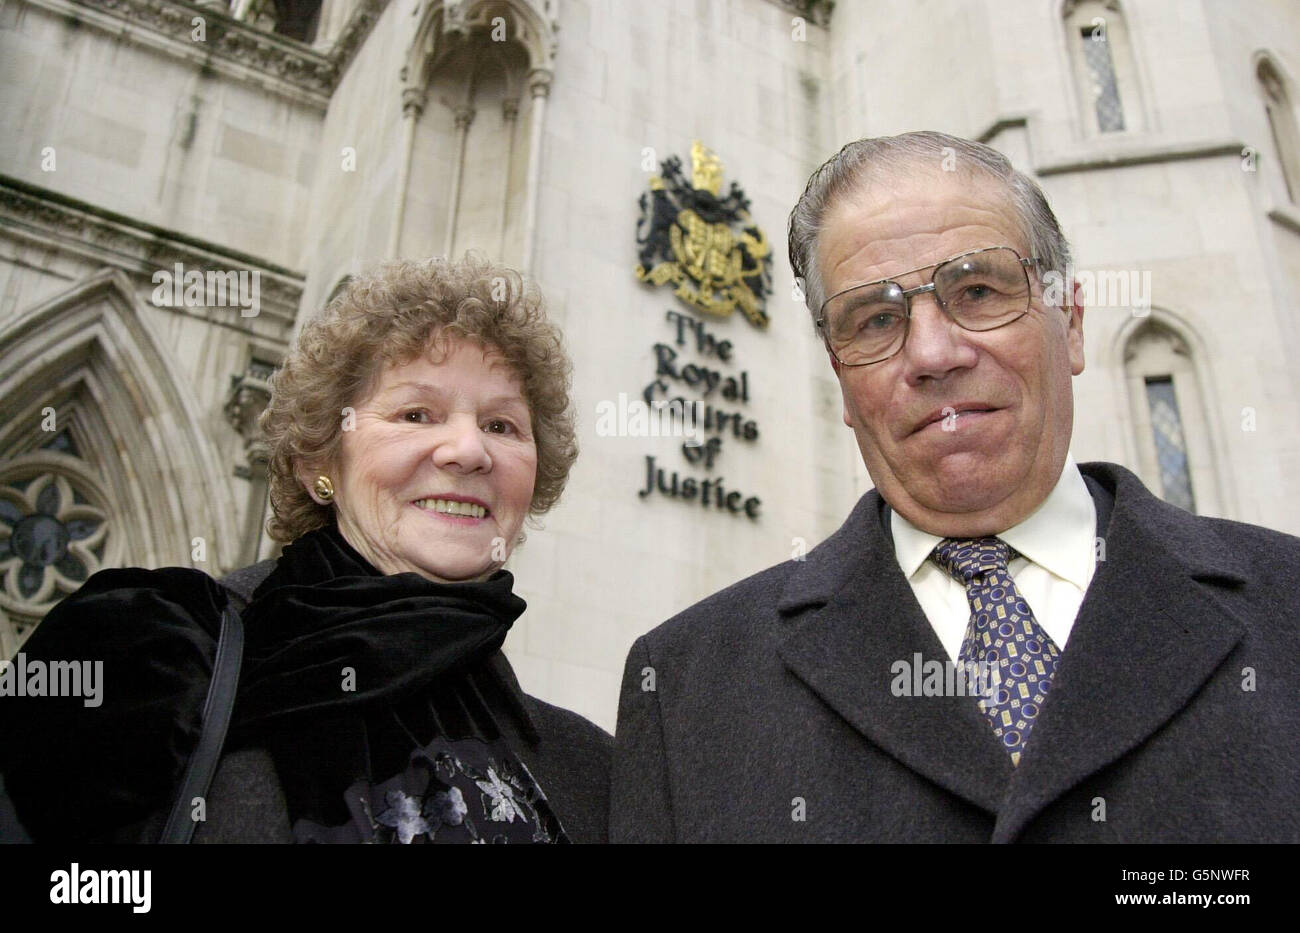 East Anglian farmer, David Winter, 70, from Halesworth, Suffolk outside the High Court, London, with his wife, Pauline having been cleared of causing a road accident blamed on mud from his farm land. * ... Mr Winter was charged with manslaughter after a motorist - doctor's wife and retired midwife Jennifer Townsley, 59, was fatally injured in a collision on a muddy road outside his farm but cleared after the prosecution offered no evidence. Stock Photo